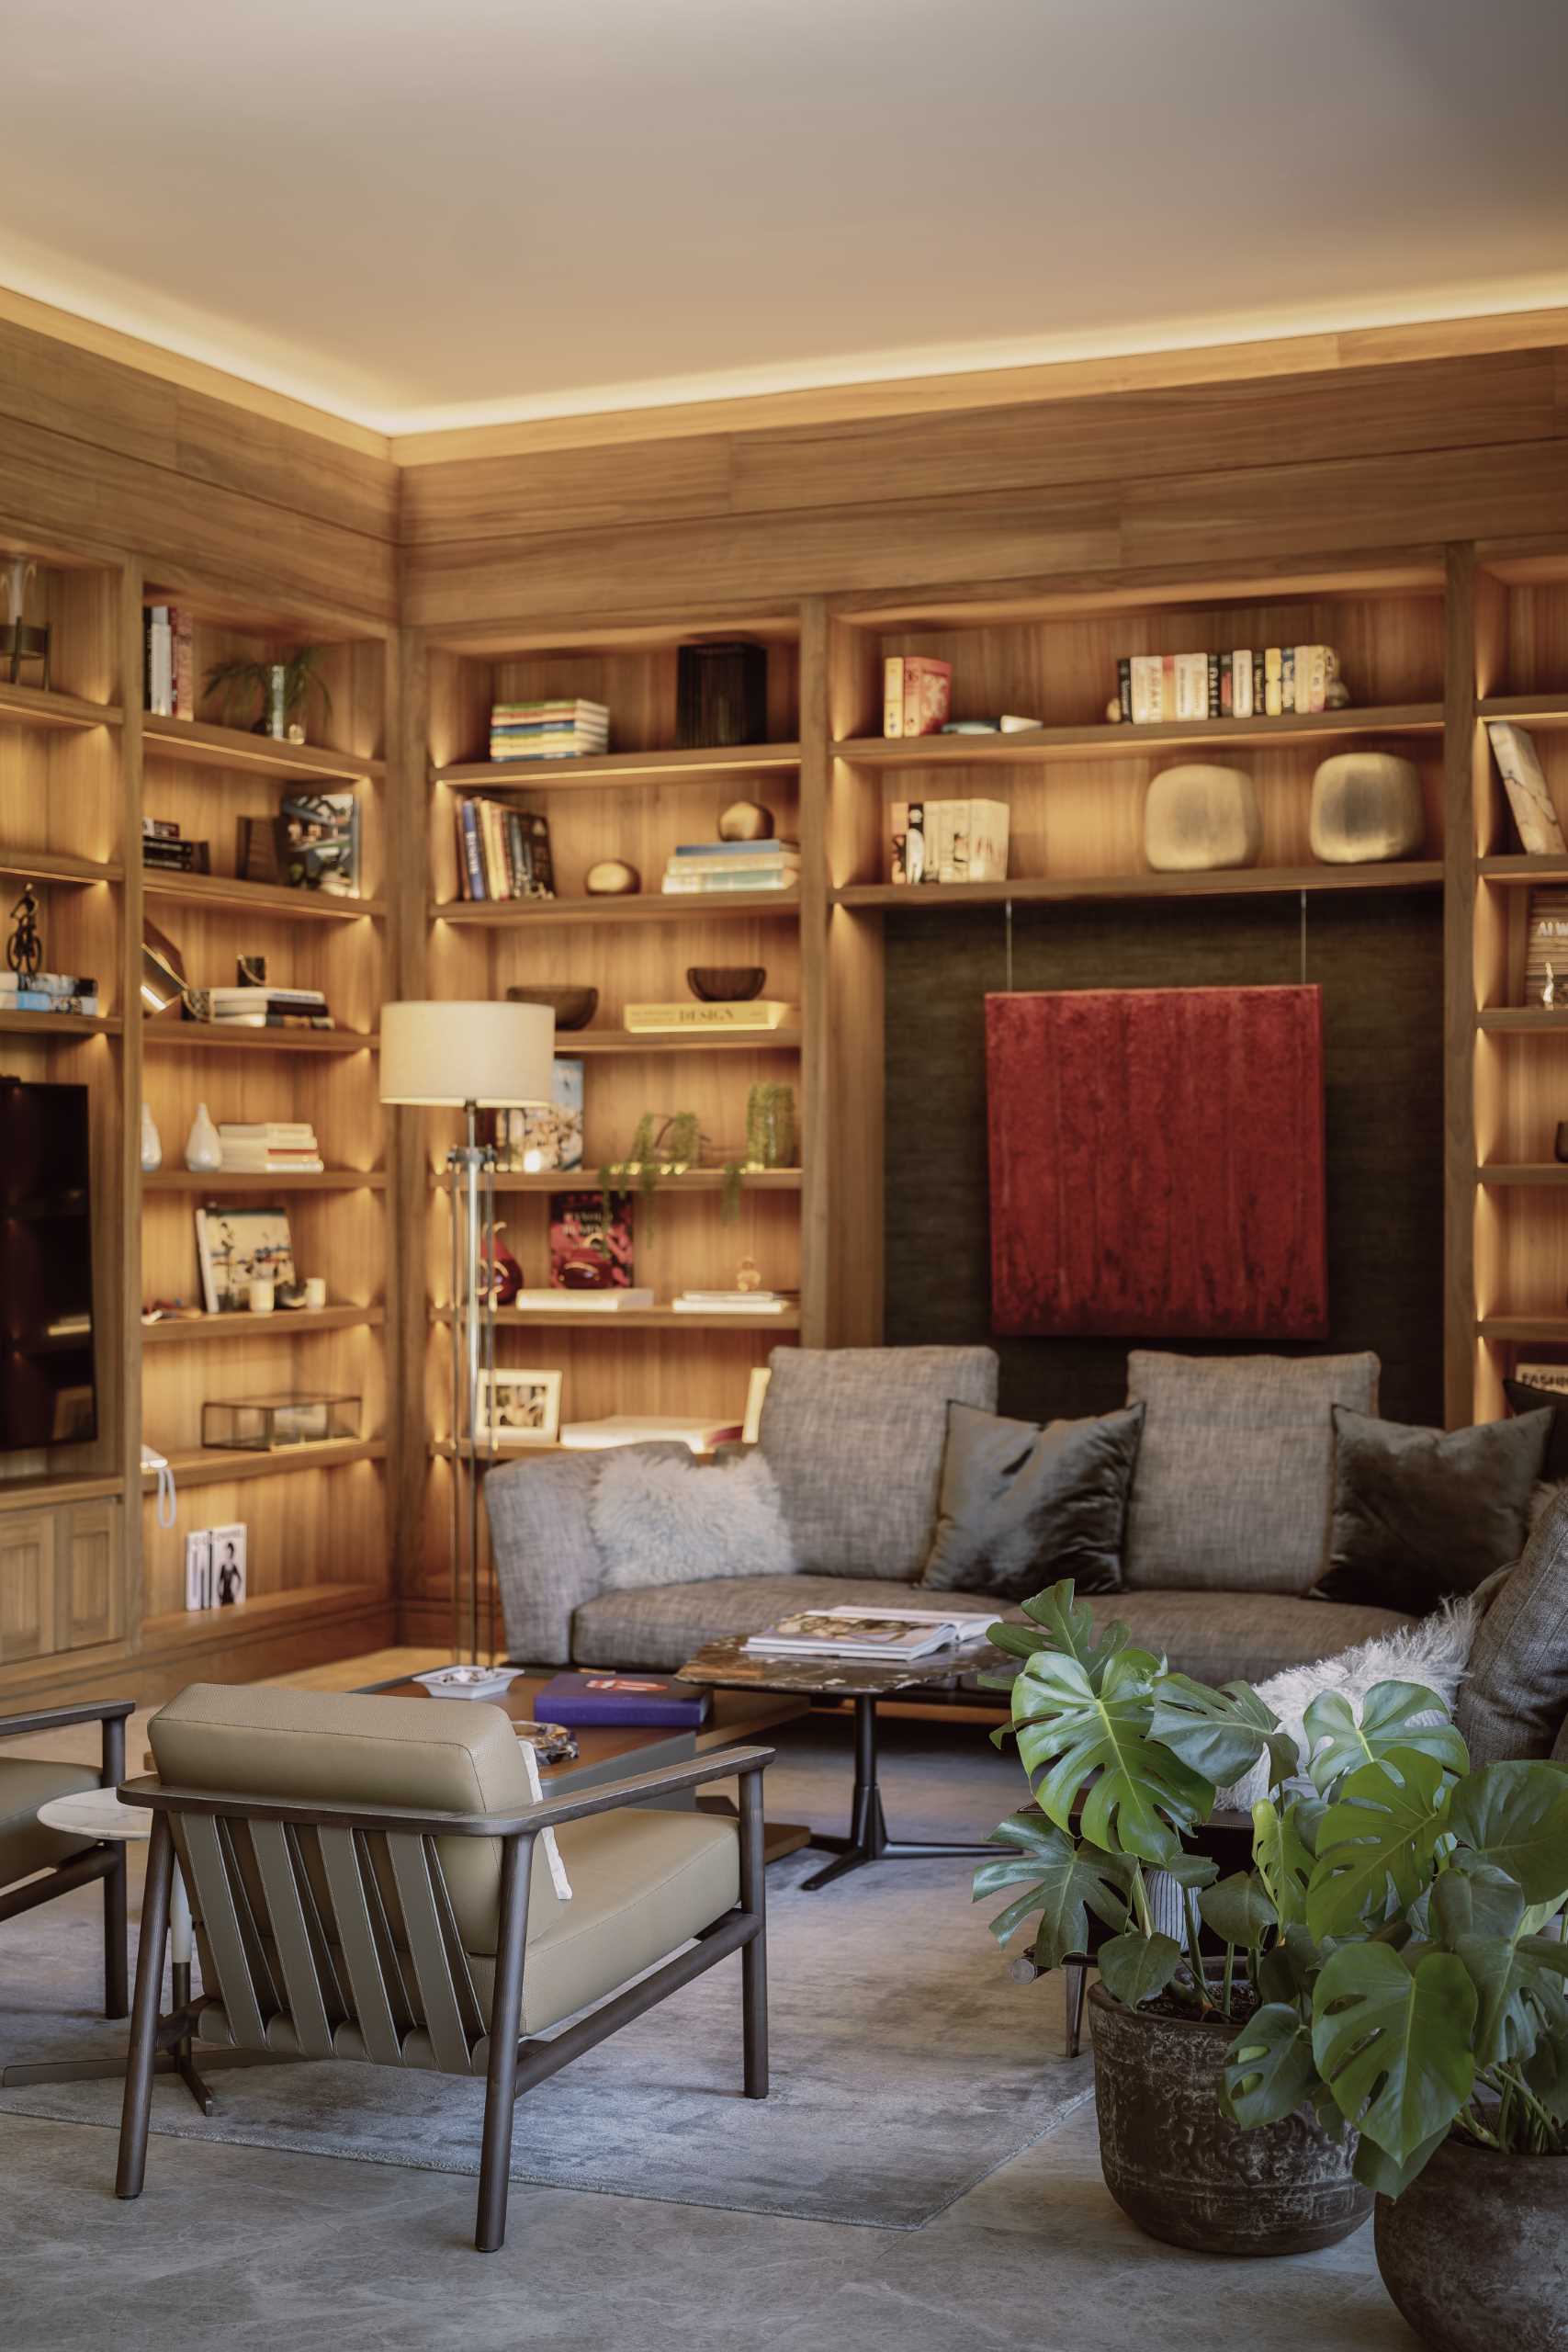 In this modern living room, embedded LED lighting lets all of the decorative elements, like books, sculptures, bowls, vases and plants, be the focus of the room. Lighting also wraps around the ceiling, casting a soft indirect glow.